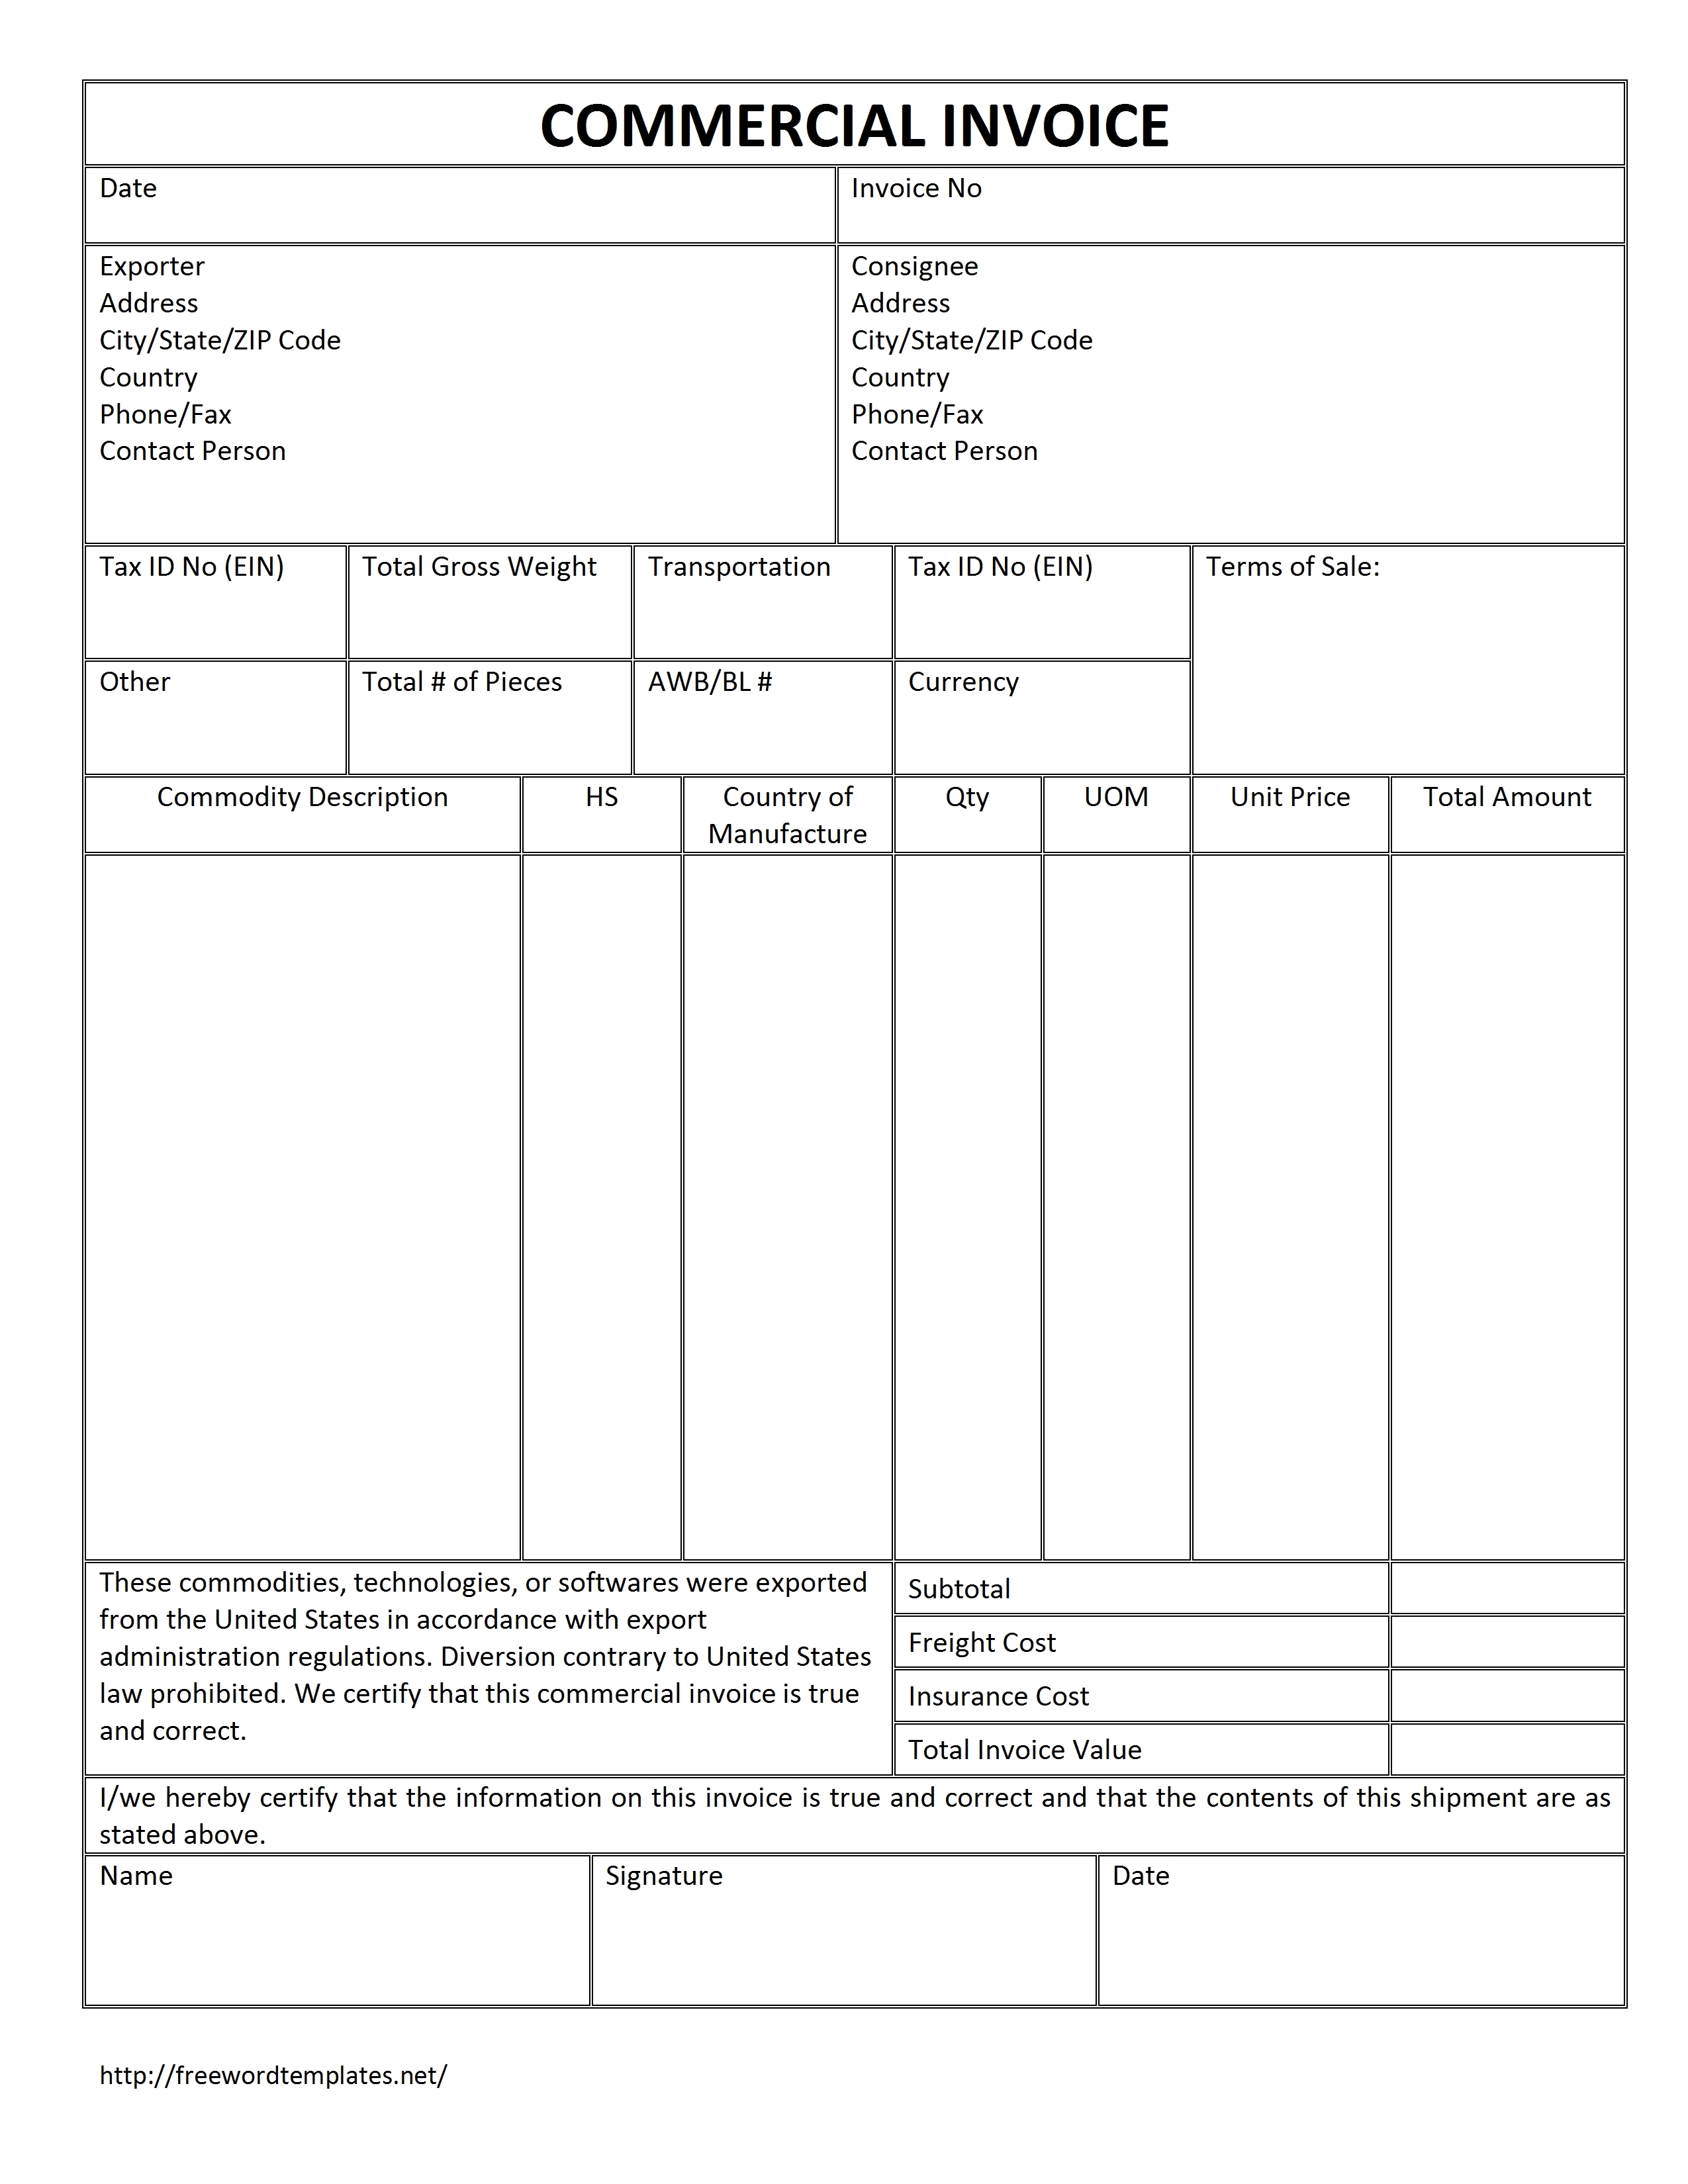 Standard Commercial Invoice Form